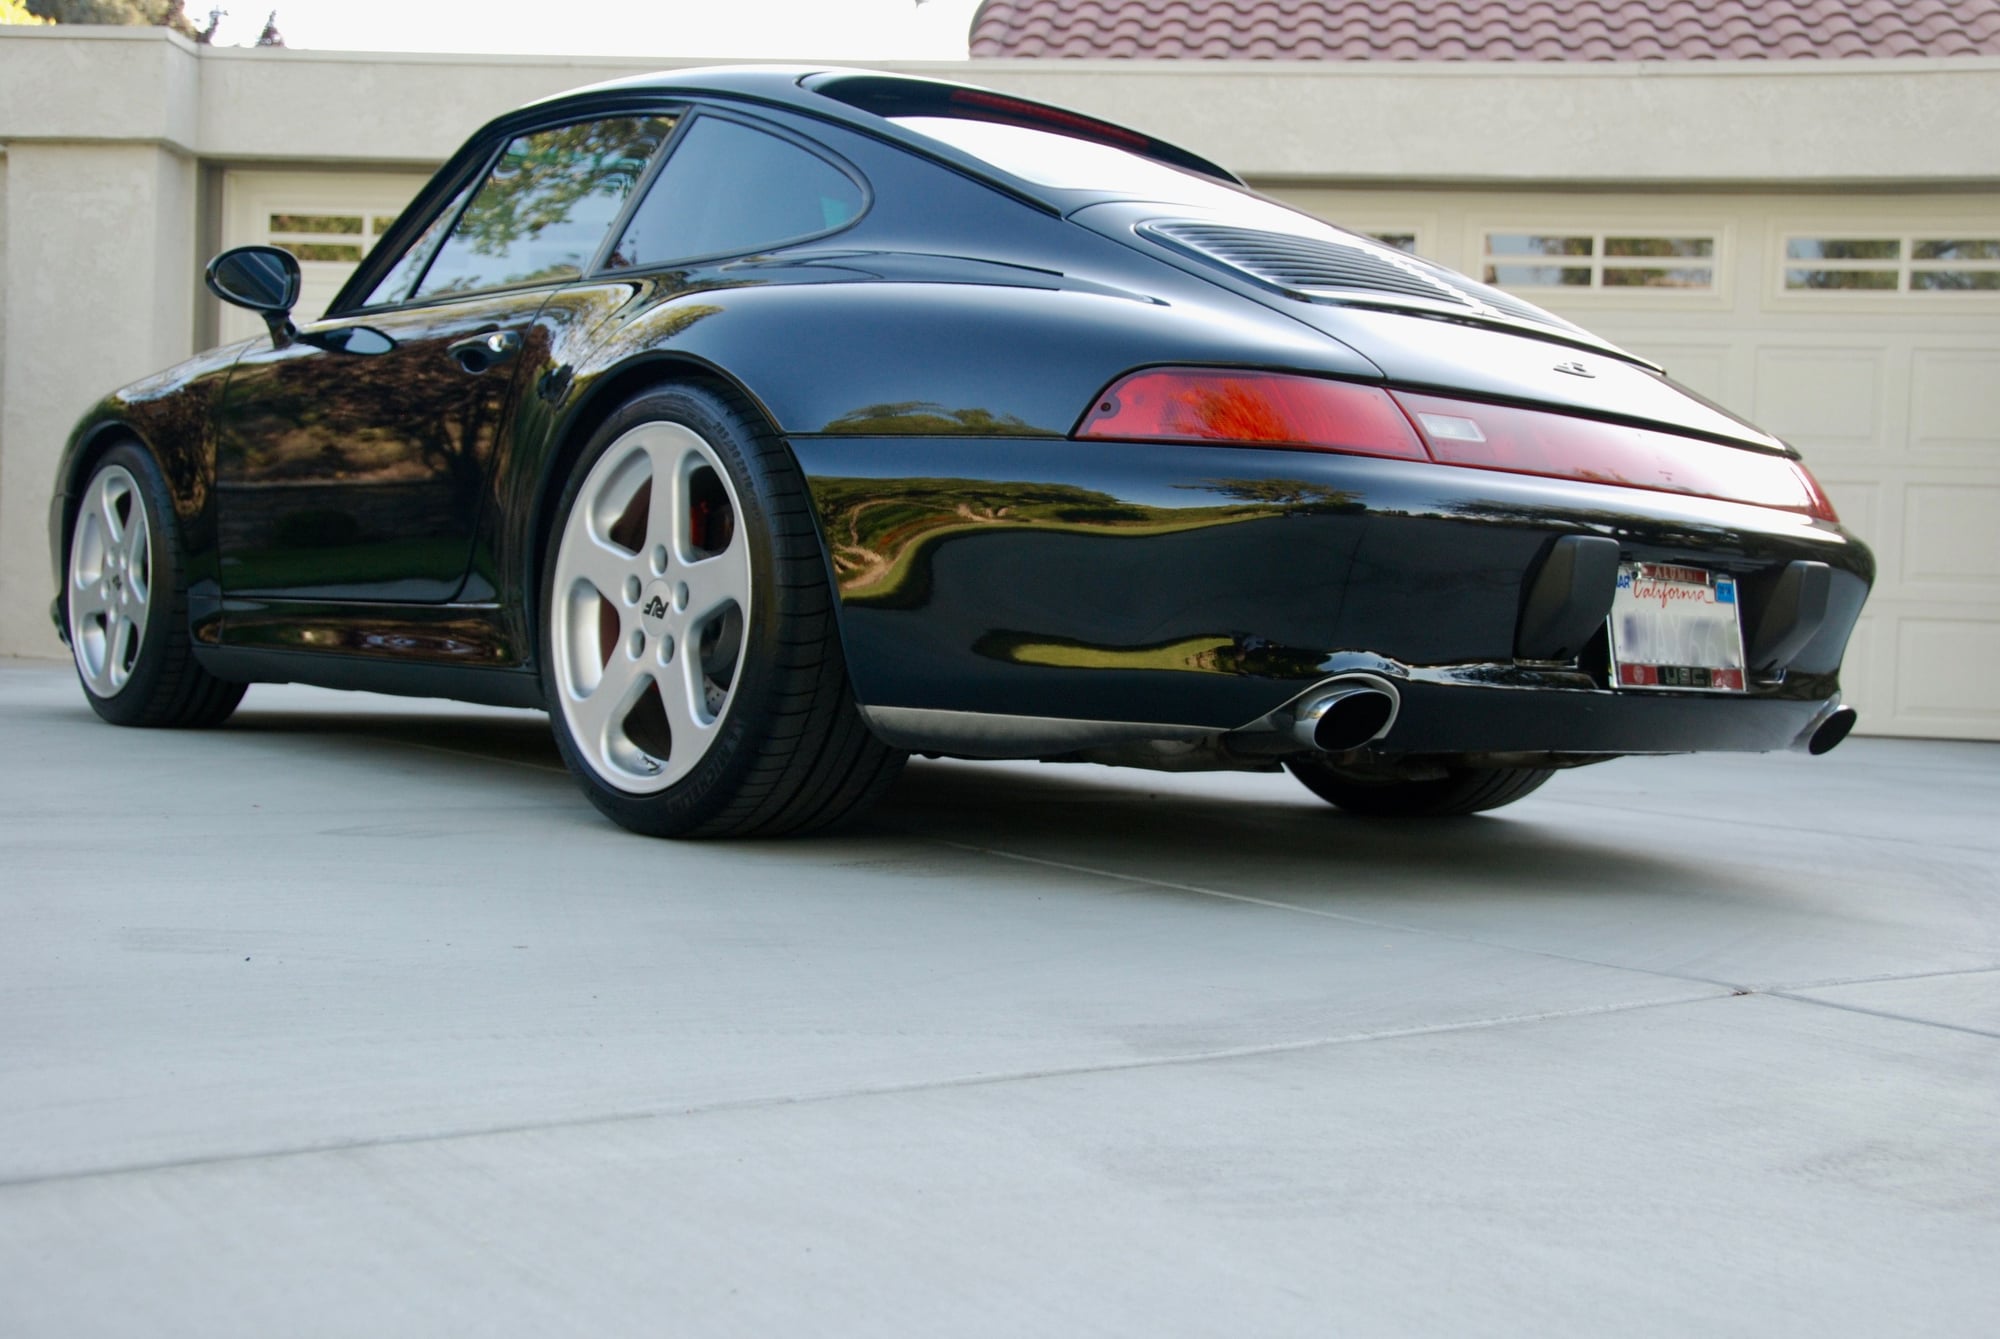 Wheels and Tires/Axles - F/S: GENUINE  RUF 18" Aluminum Wheels -  $2,800 - Used - 1995 to 1998 Porsche 911 - Riverside, CA 92506, United States